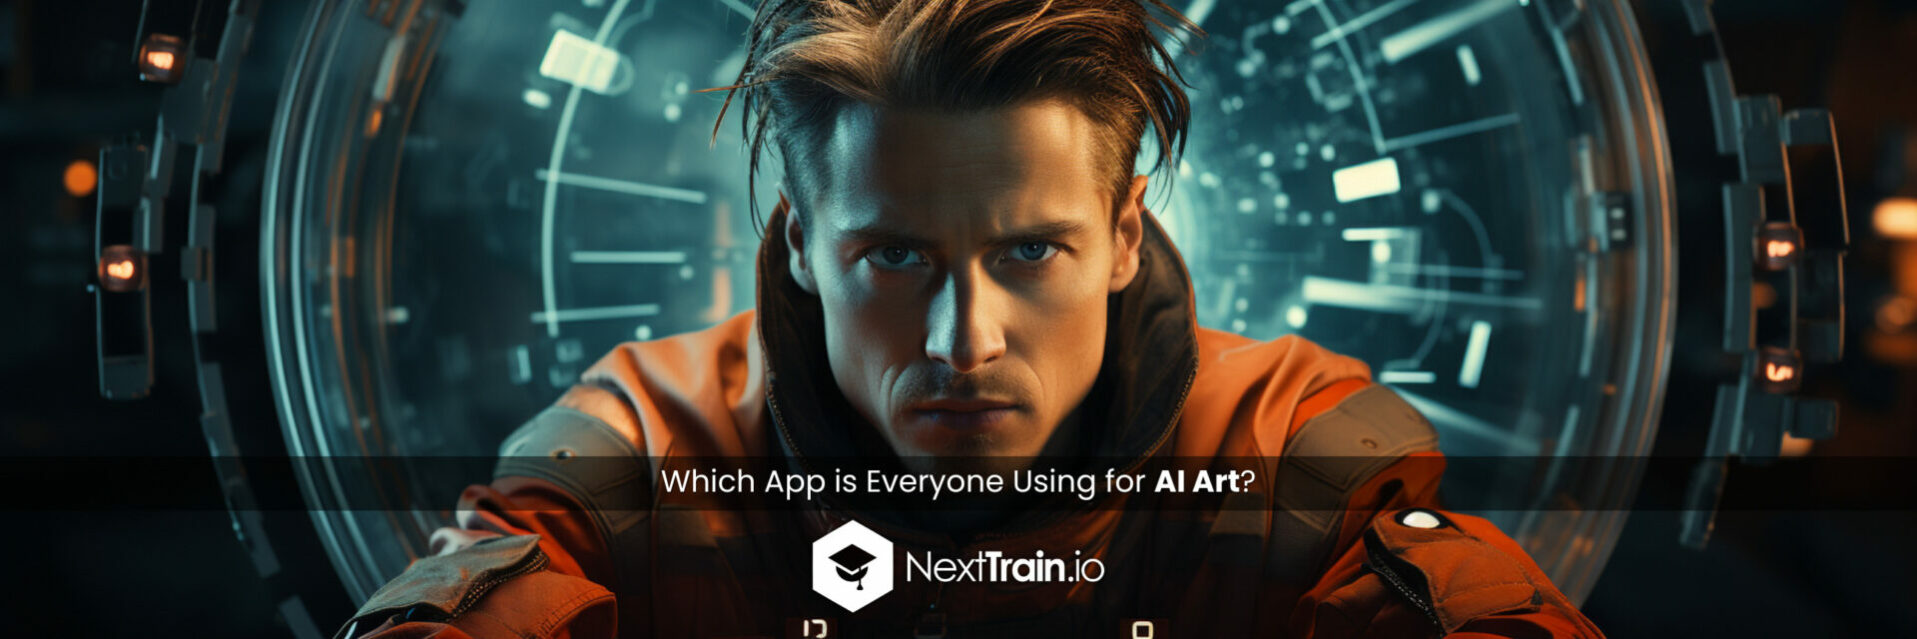 Which App is Everyone Using for AI Art?